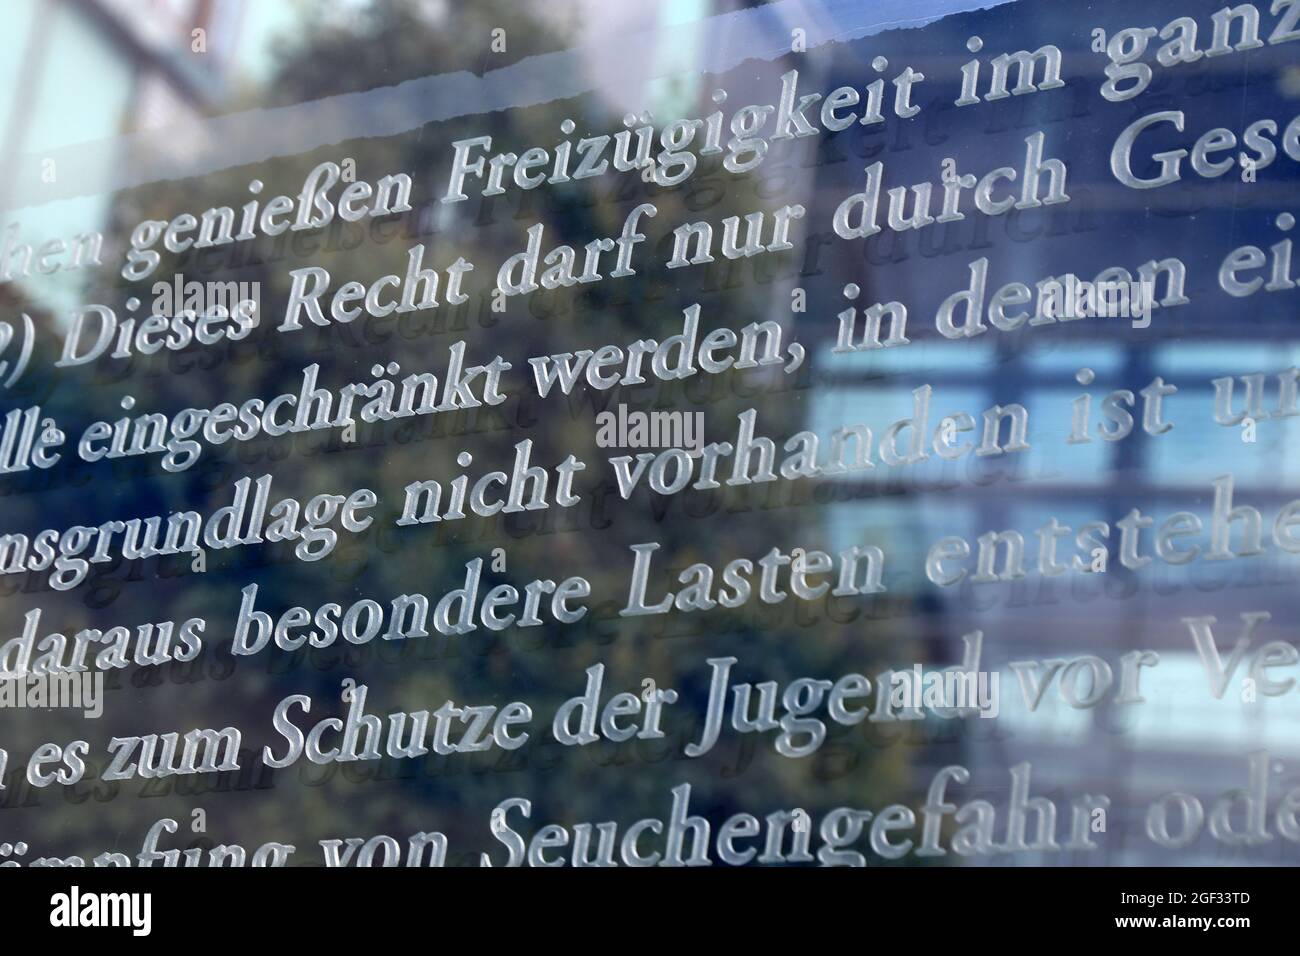 German Basic Law Article 11, Freedom of Movement (Freizügigkeit), photographed on the glass panes at Jakob-Kaiser-Haus in Berlin Stock Photo